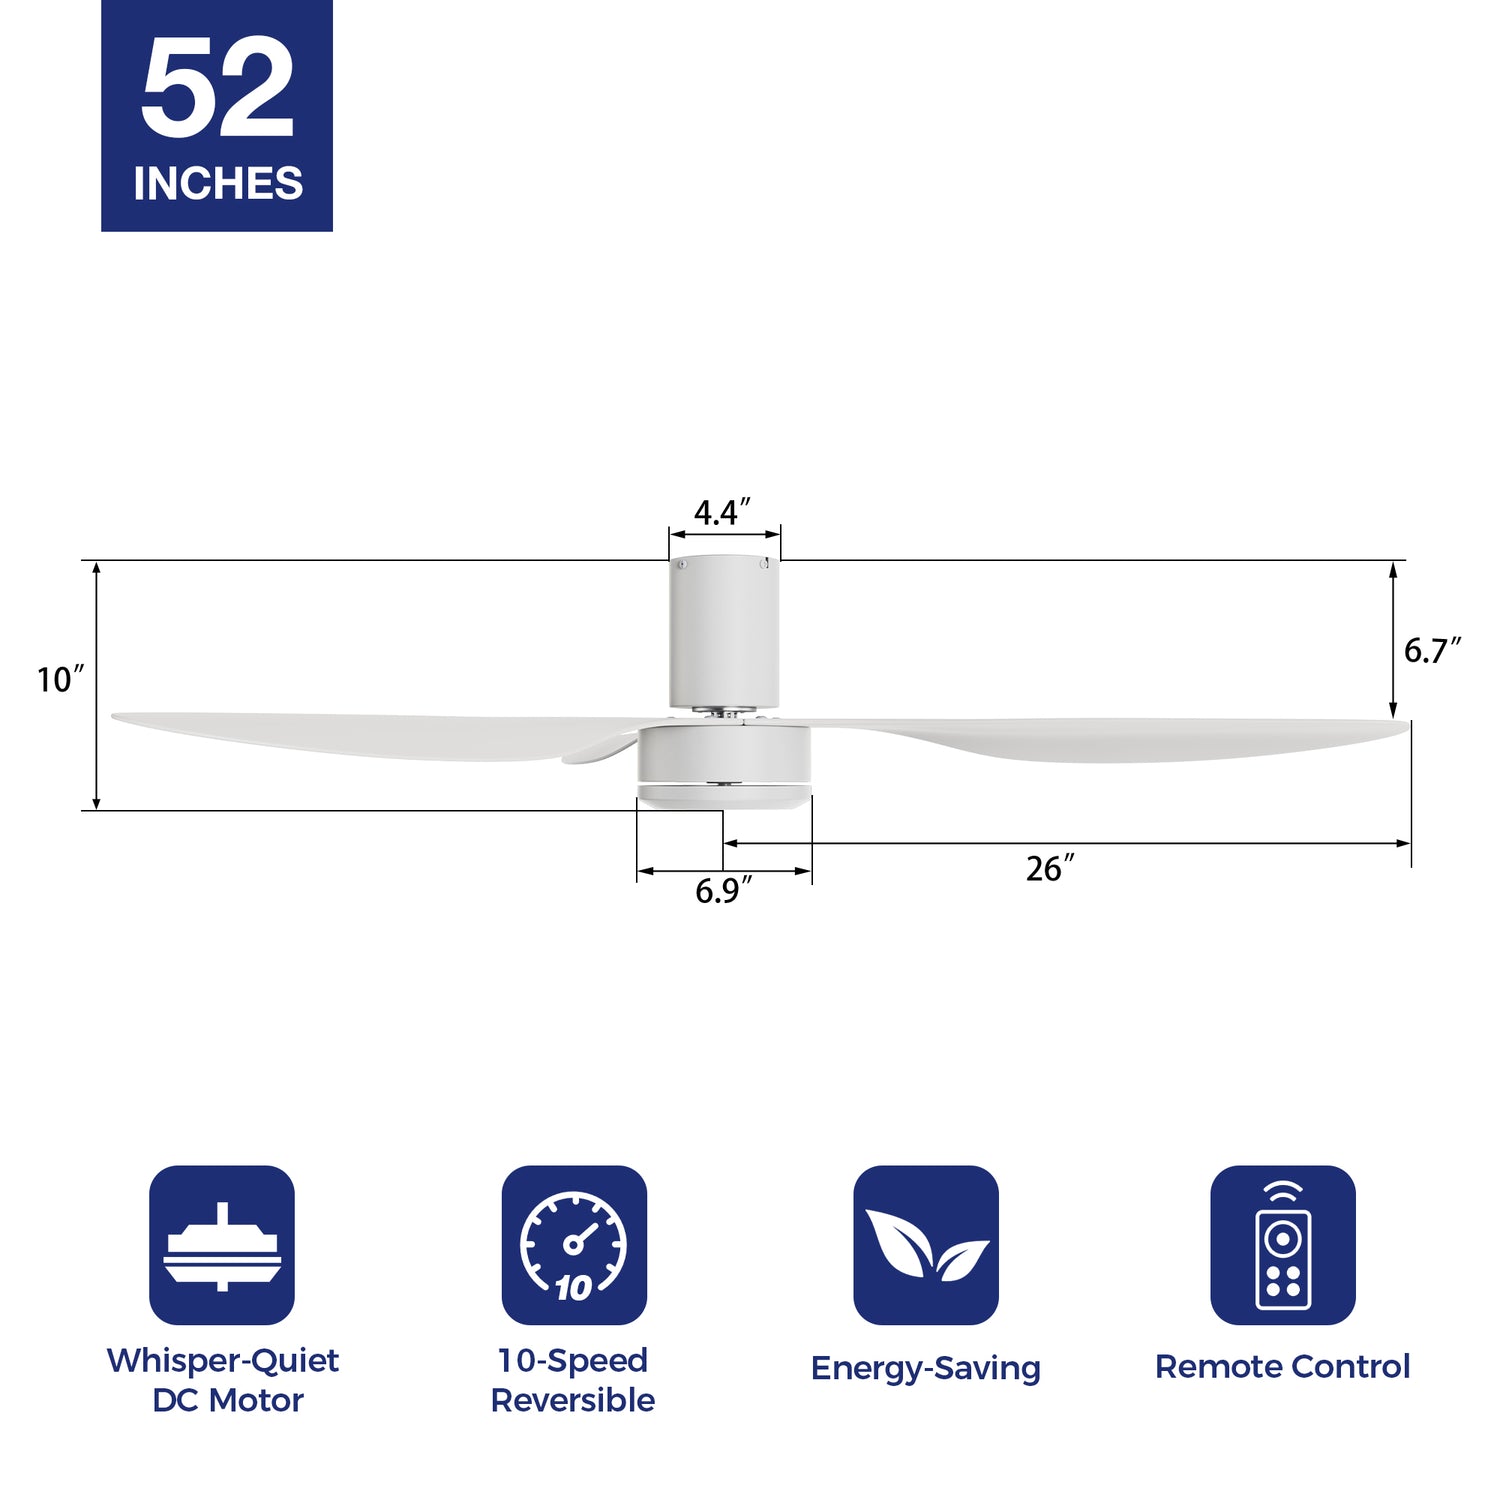 Enhance your indoor space with the 52in Ceiling Fan. Reversible DC motor, durable ABS blades, and modern design for personalized comfort. 